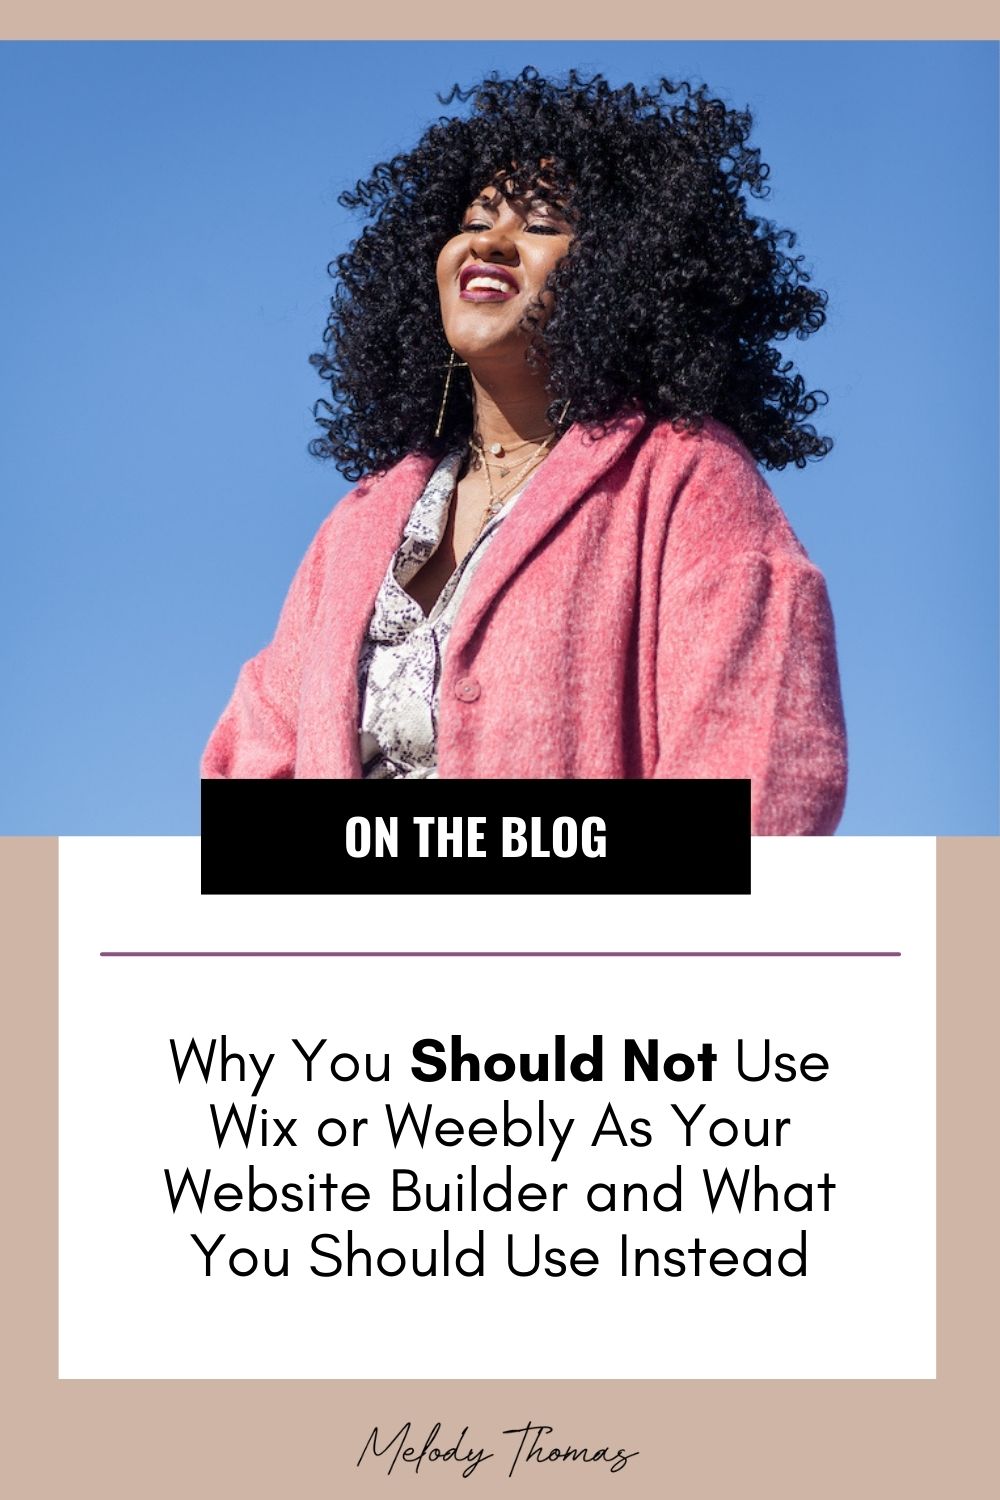 Why You Should Not Use Wix or Weebly As Your Website Builder and What You Should Use Instead